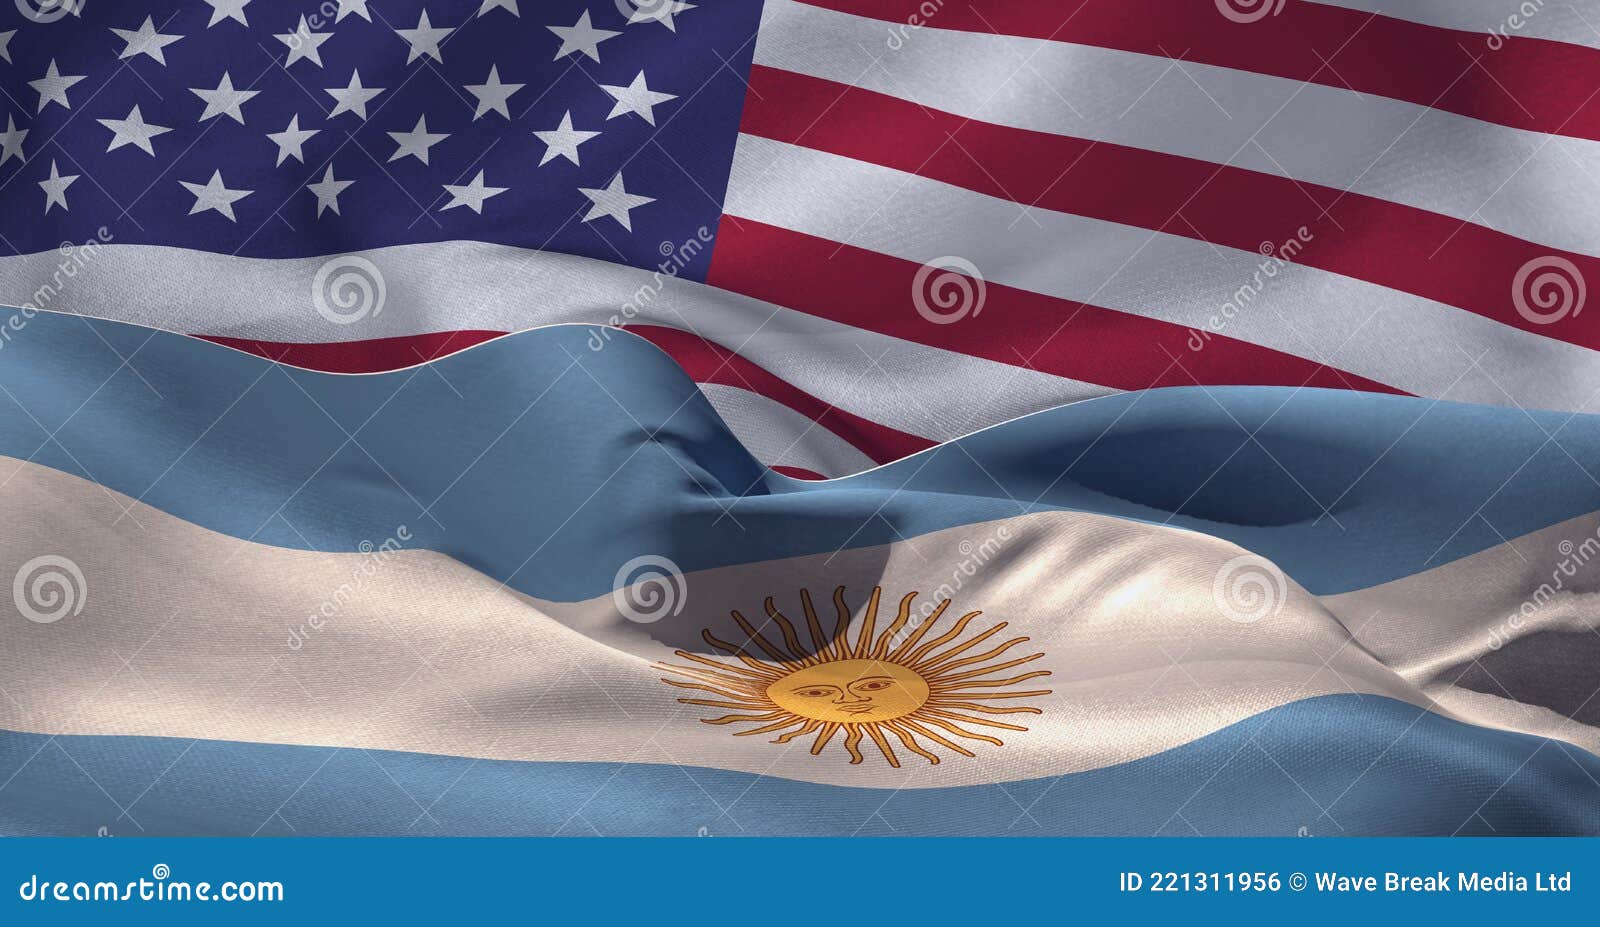 composition of argentinan and american flag billowing together